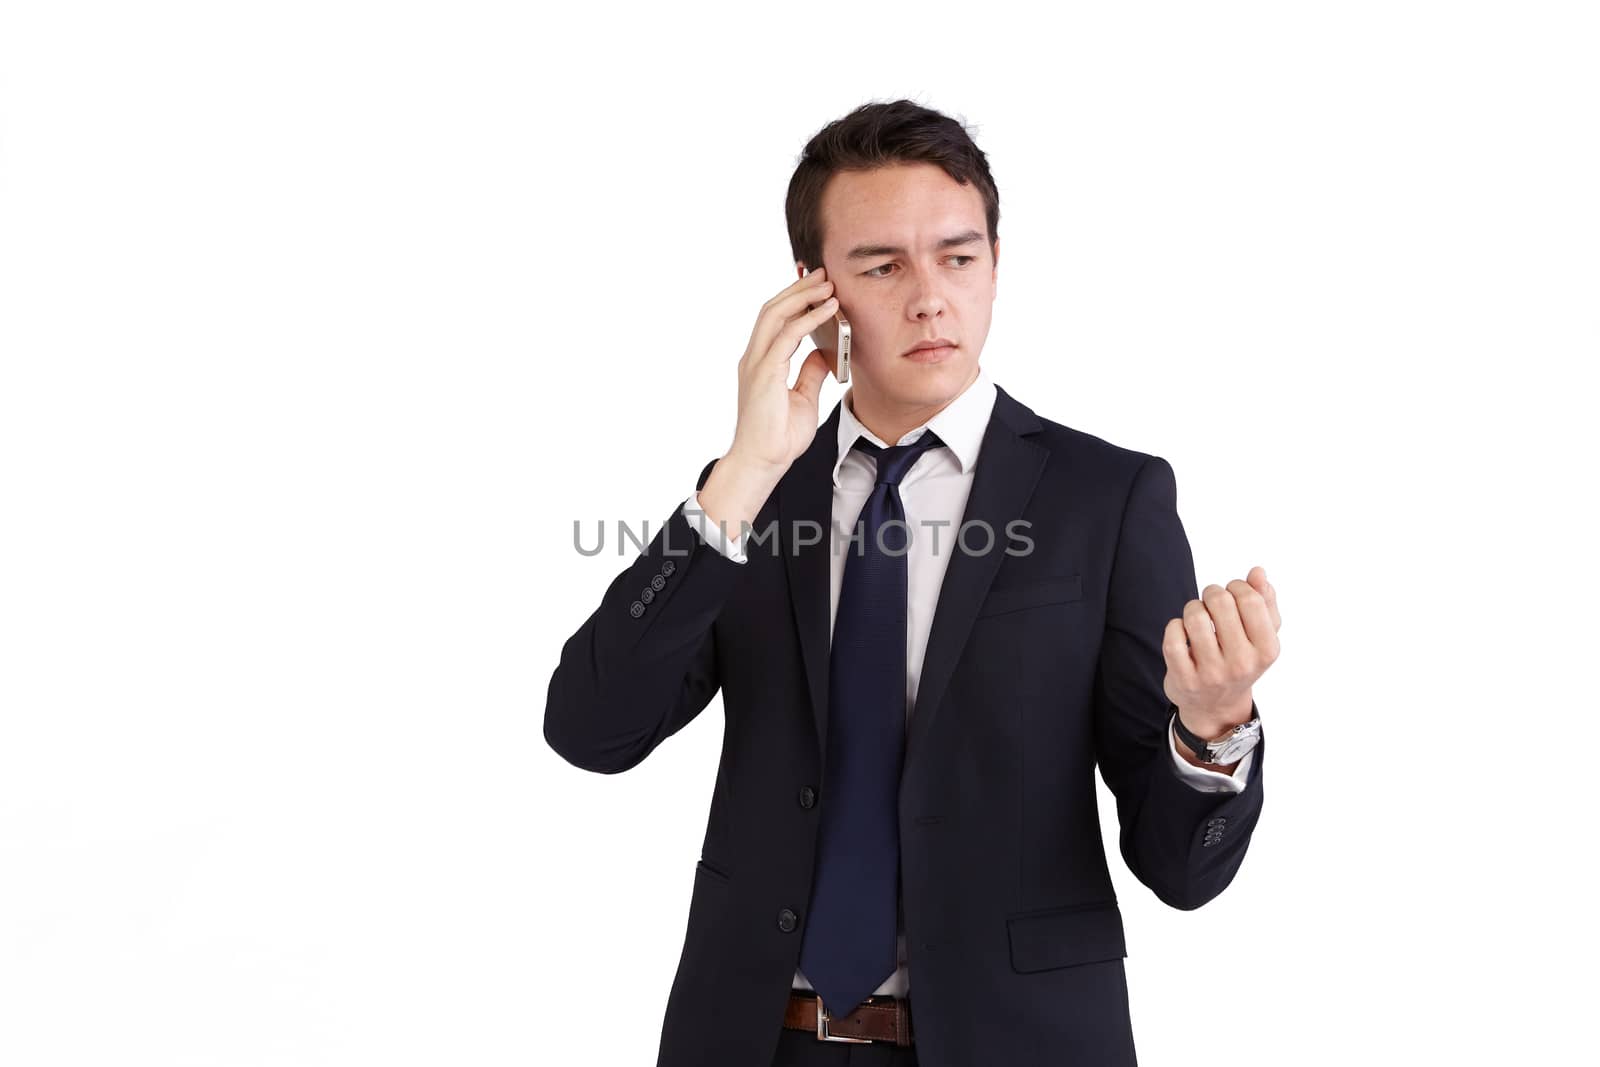 A young caucasian male businessman frowns with raised hand while holding a mobile phone looking away from camera.